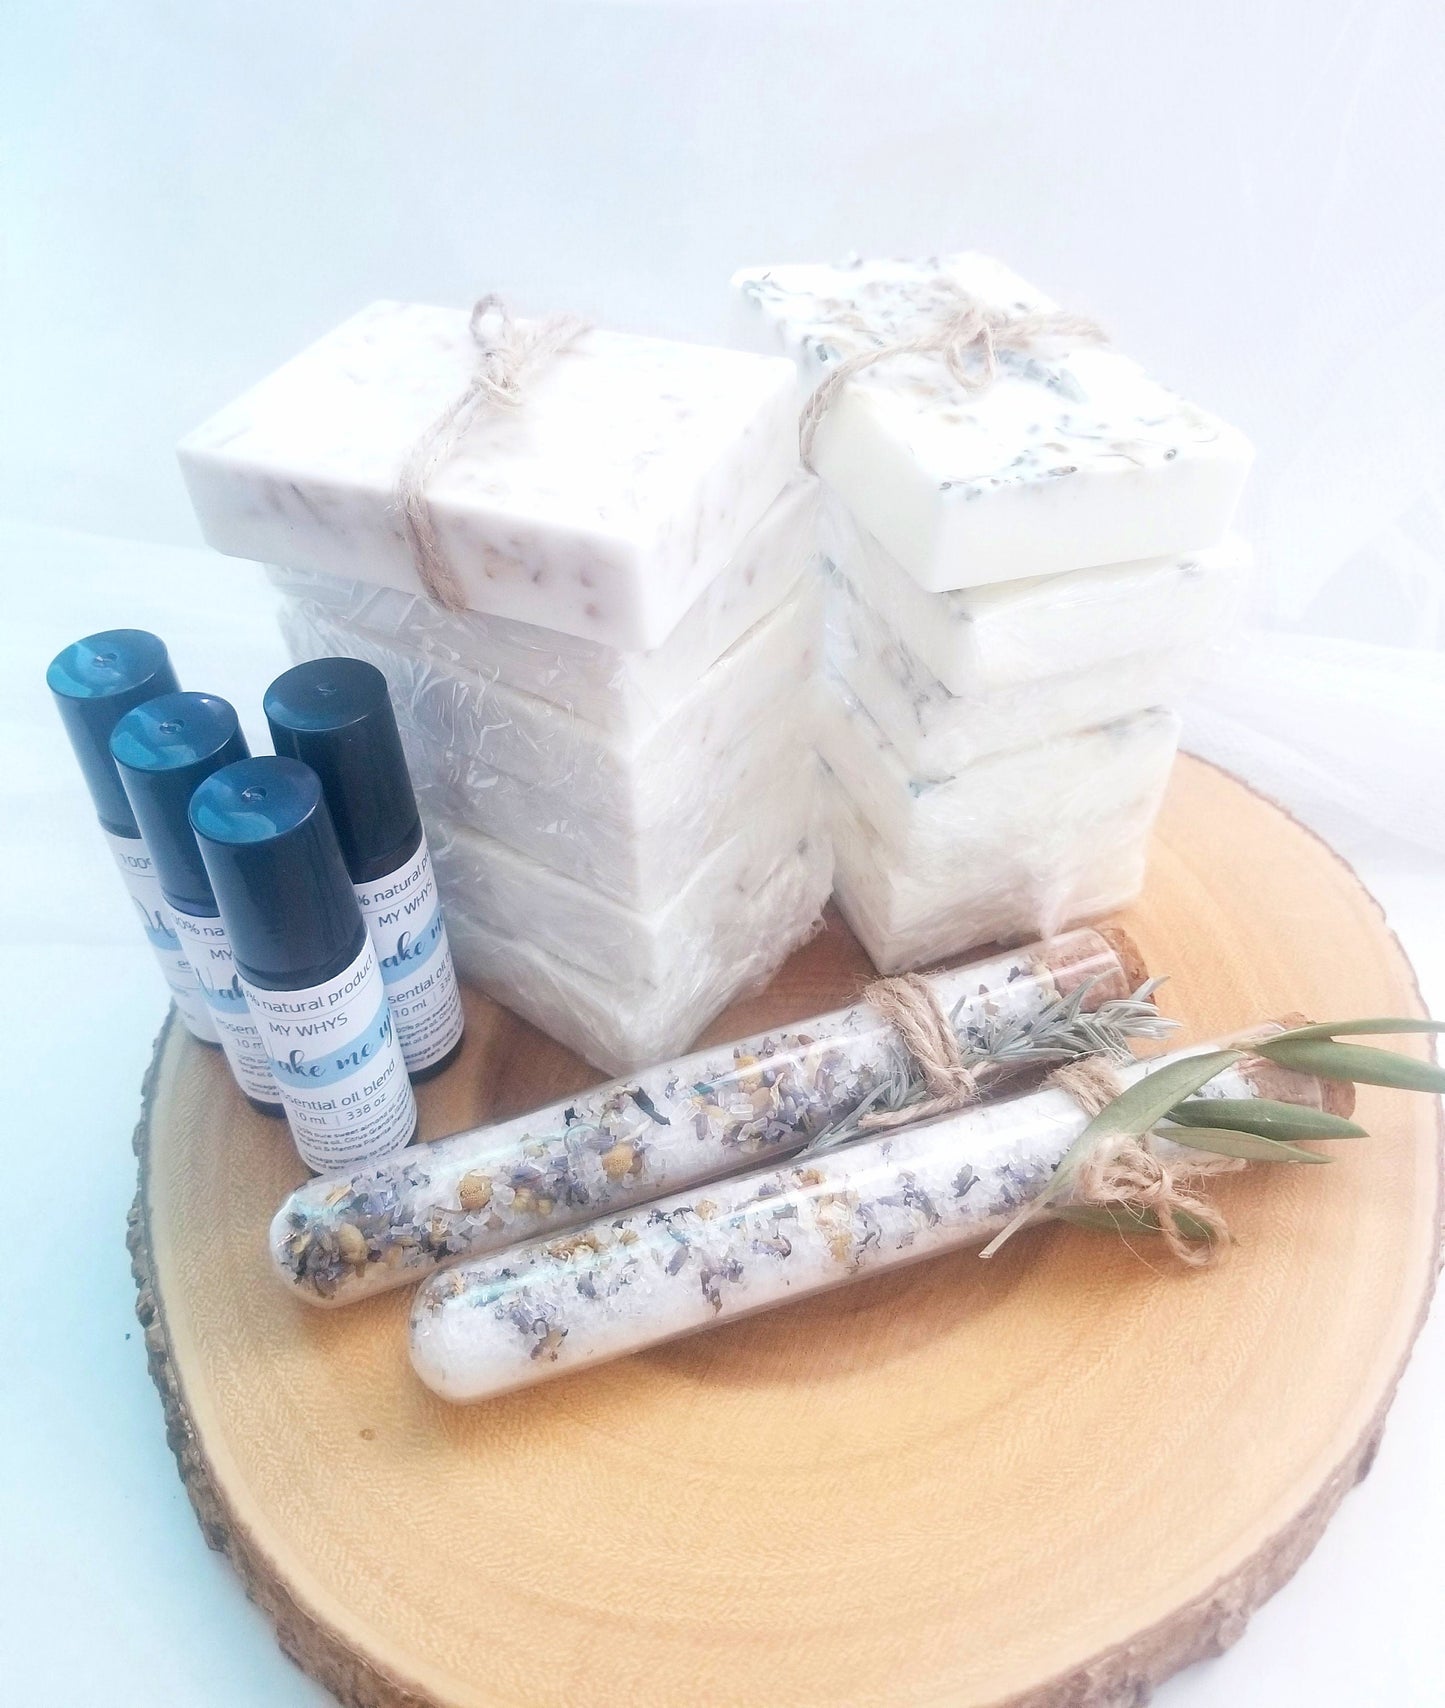 Thank you gift set, care package 100% natural products